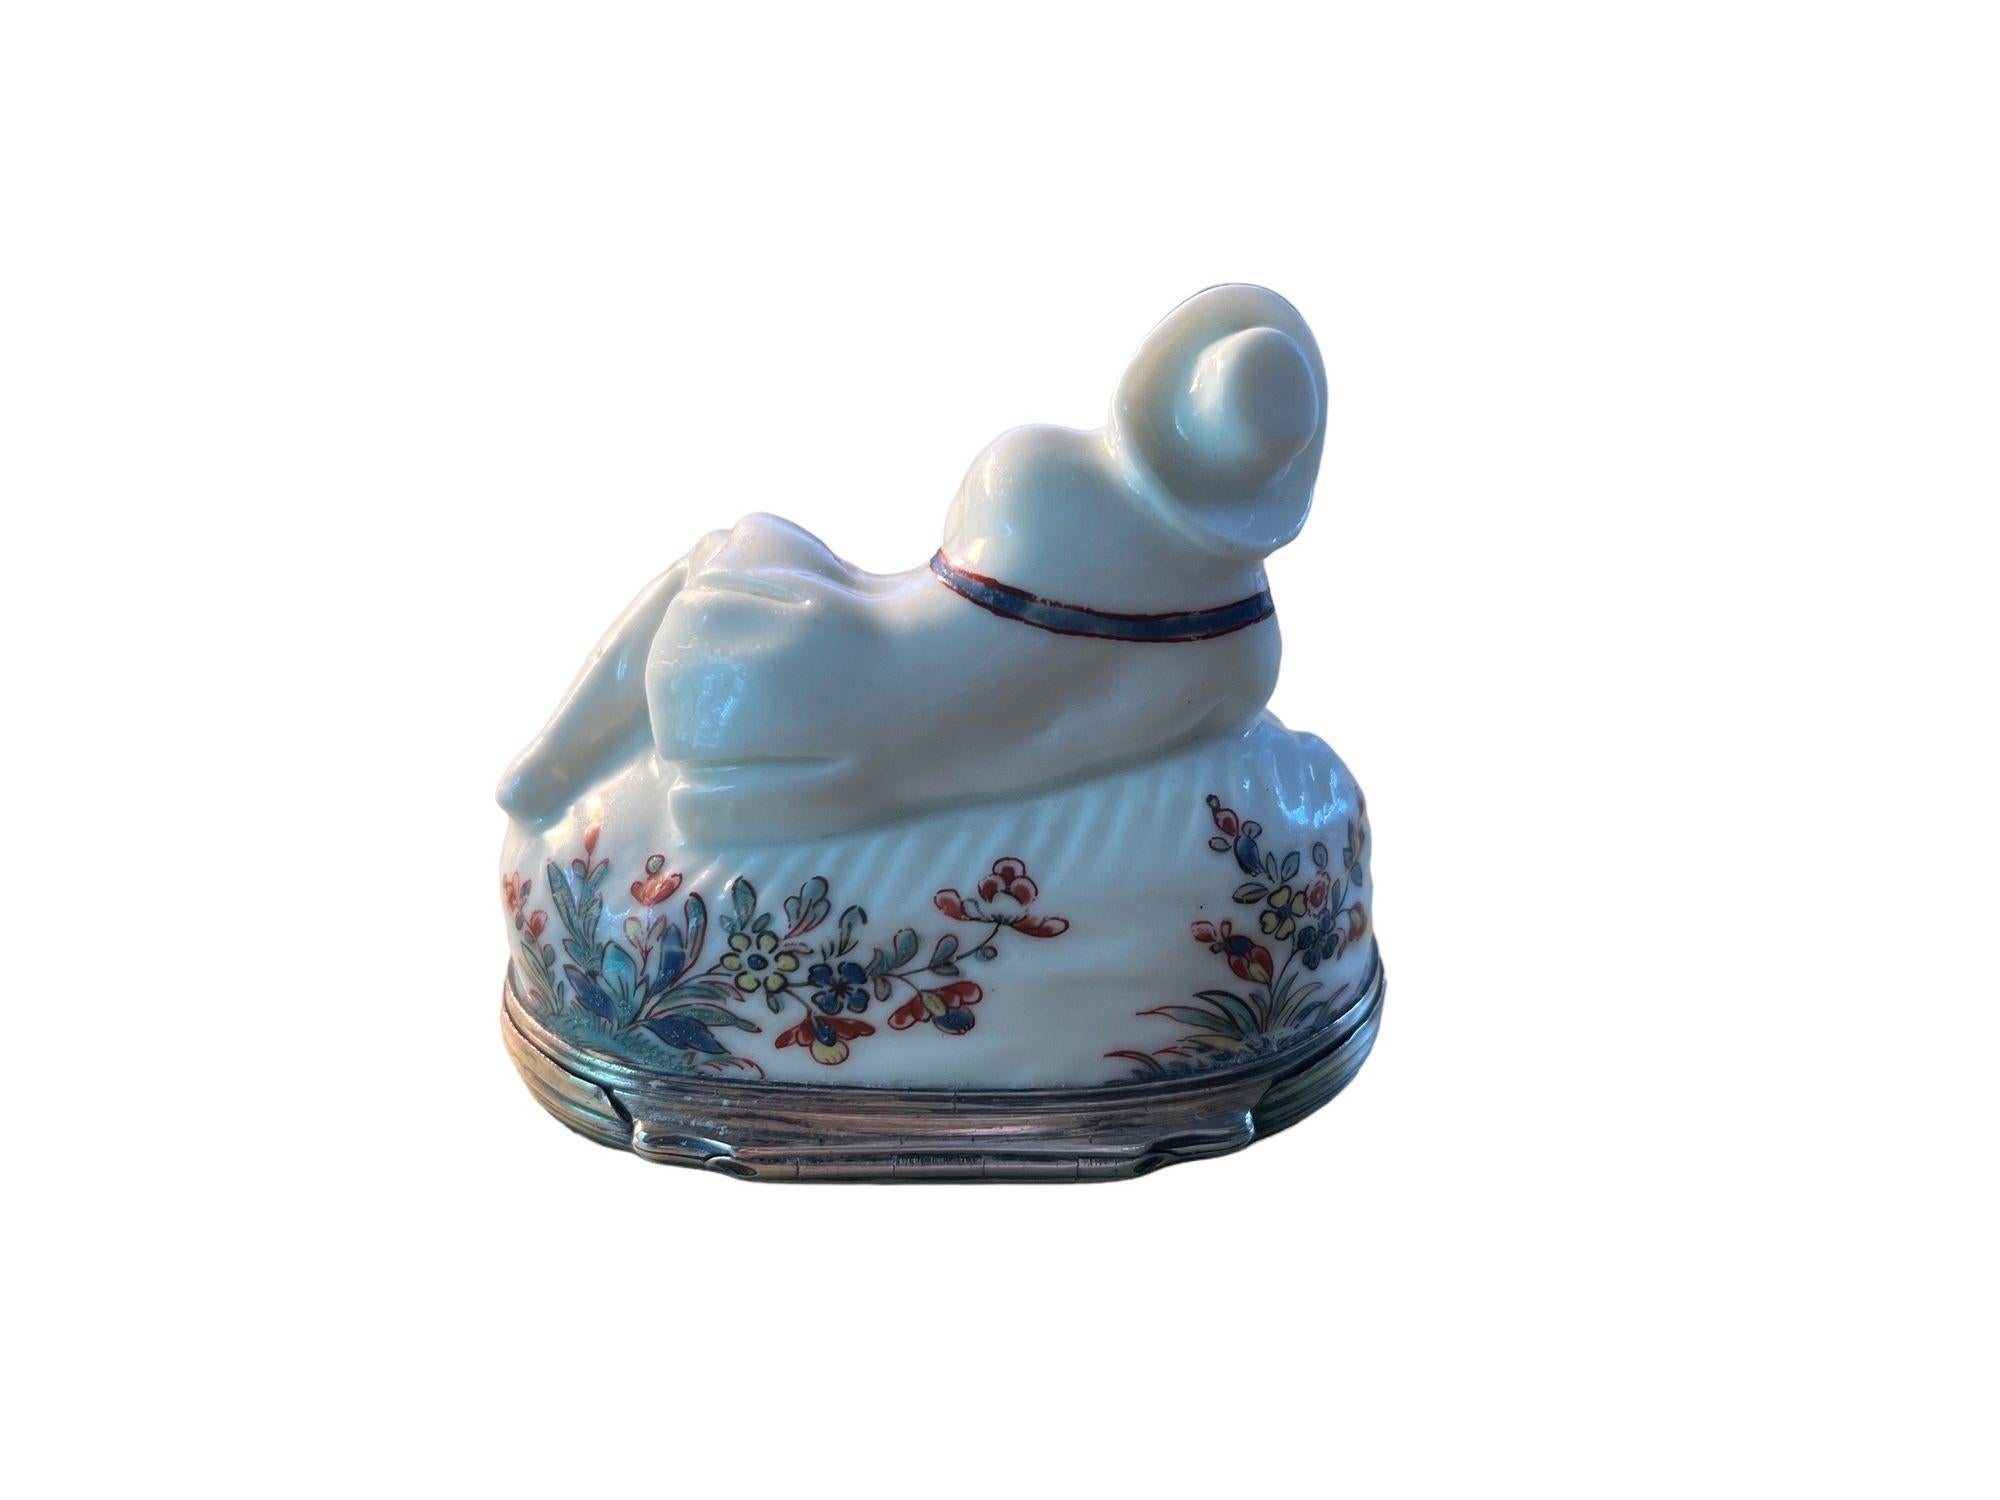 Rococo Saint-Cloud snuff box in the form of a shepherd, circa 1735 For Sale